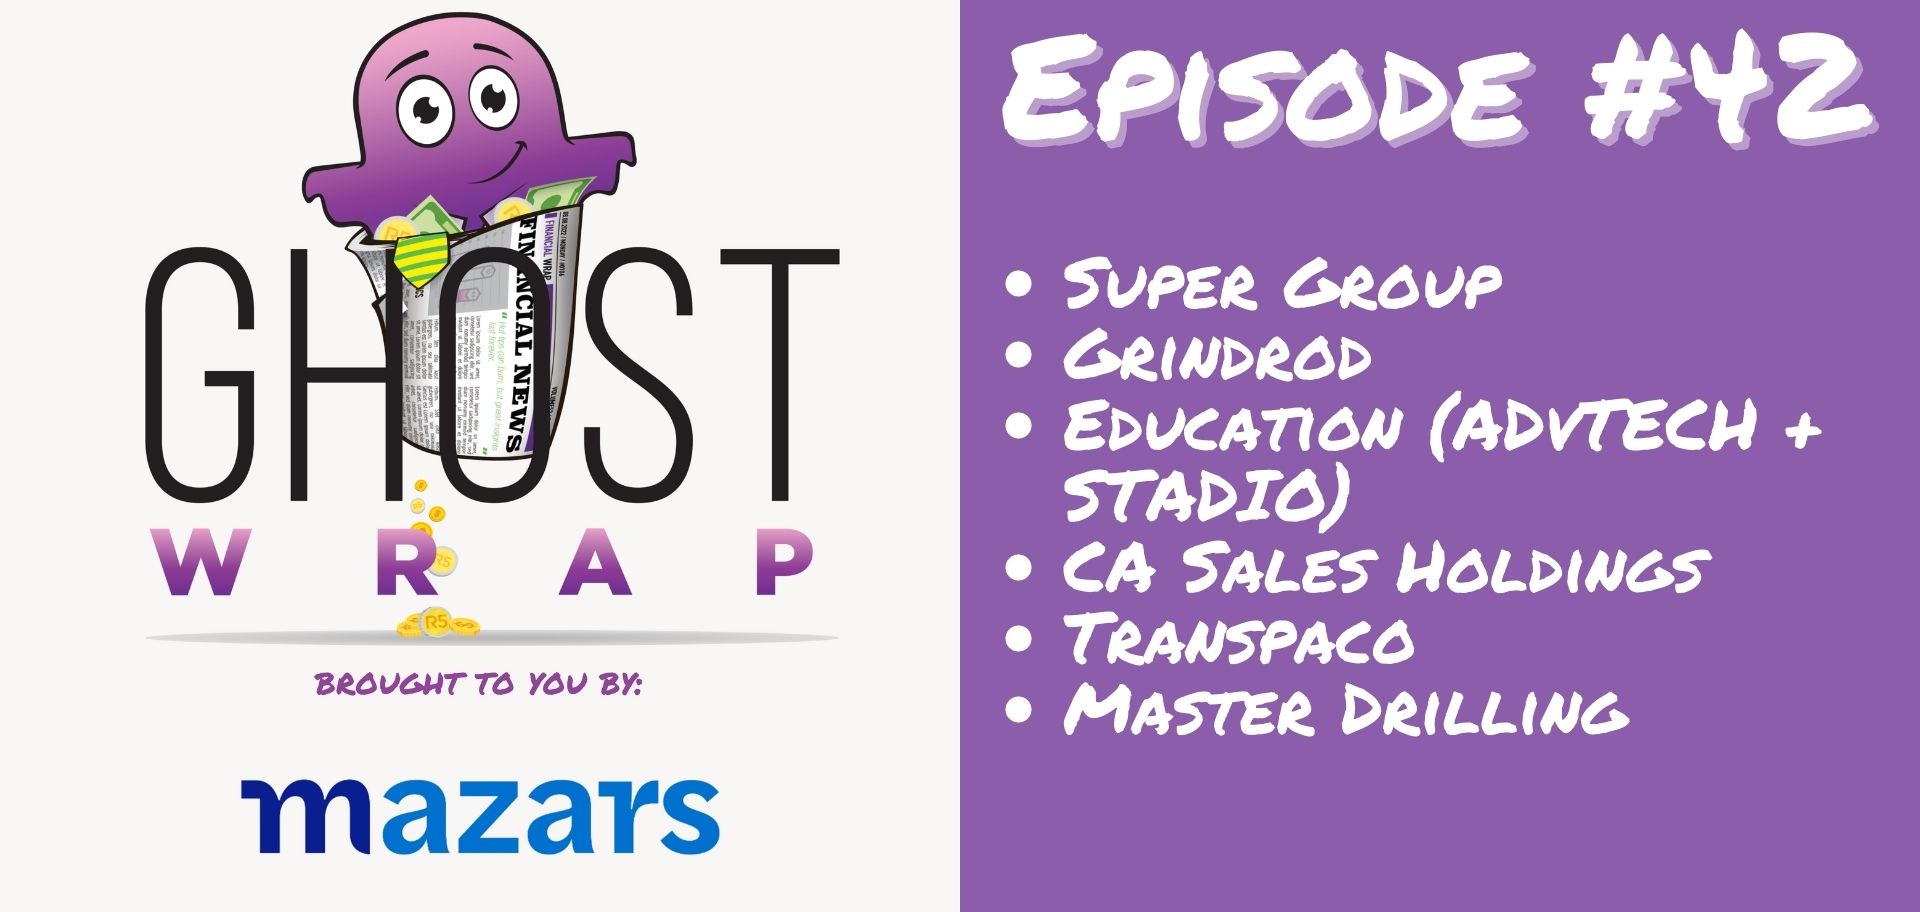 Ghost Wrap #42 (Super Group | Grindrod | ADvTECH | STADIO | CA Sales Holdings | Transpaco | Master Drilling)